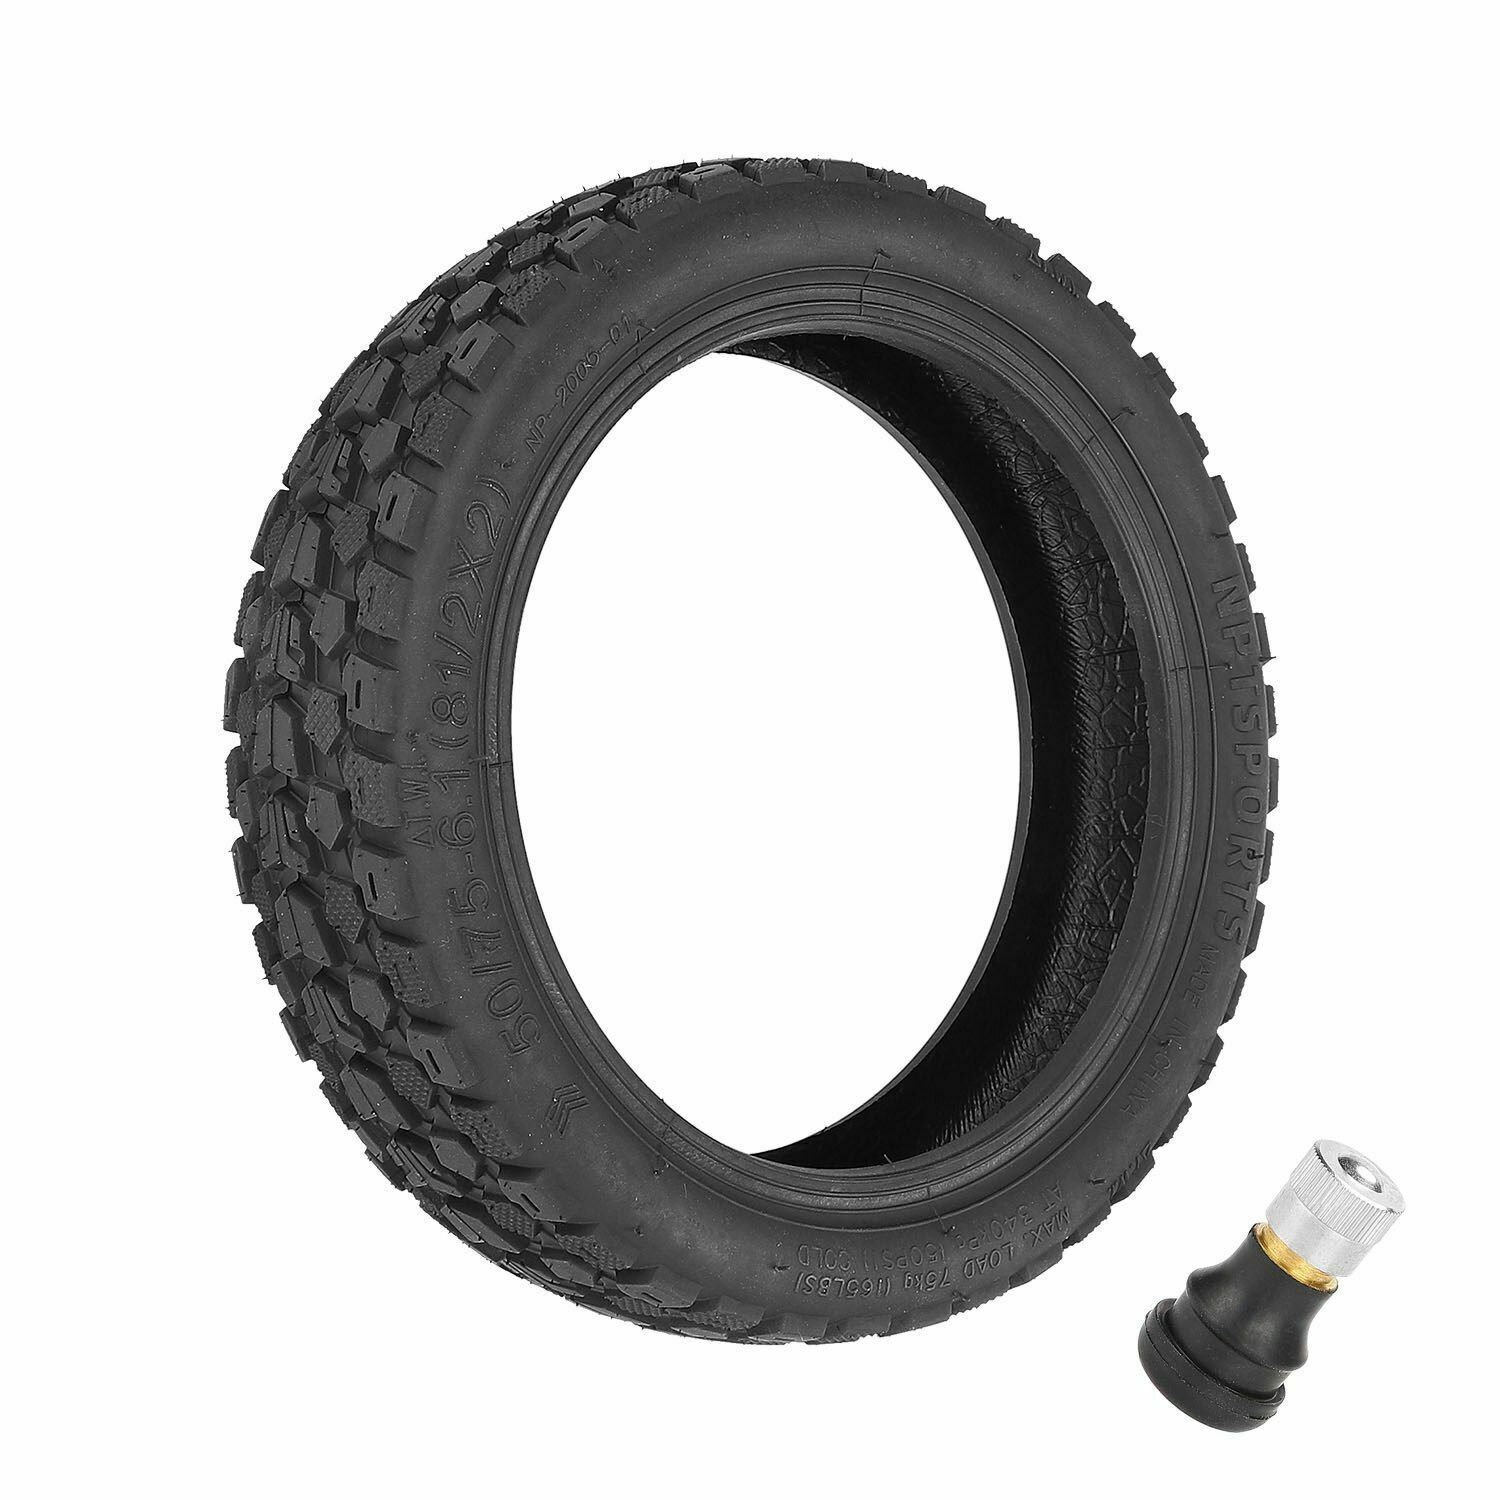 2 Pcs Off Road Tires for M365 1S Pro Pro2 Electric Scooter 8.5in Vacuum Tire